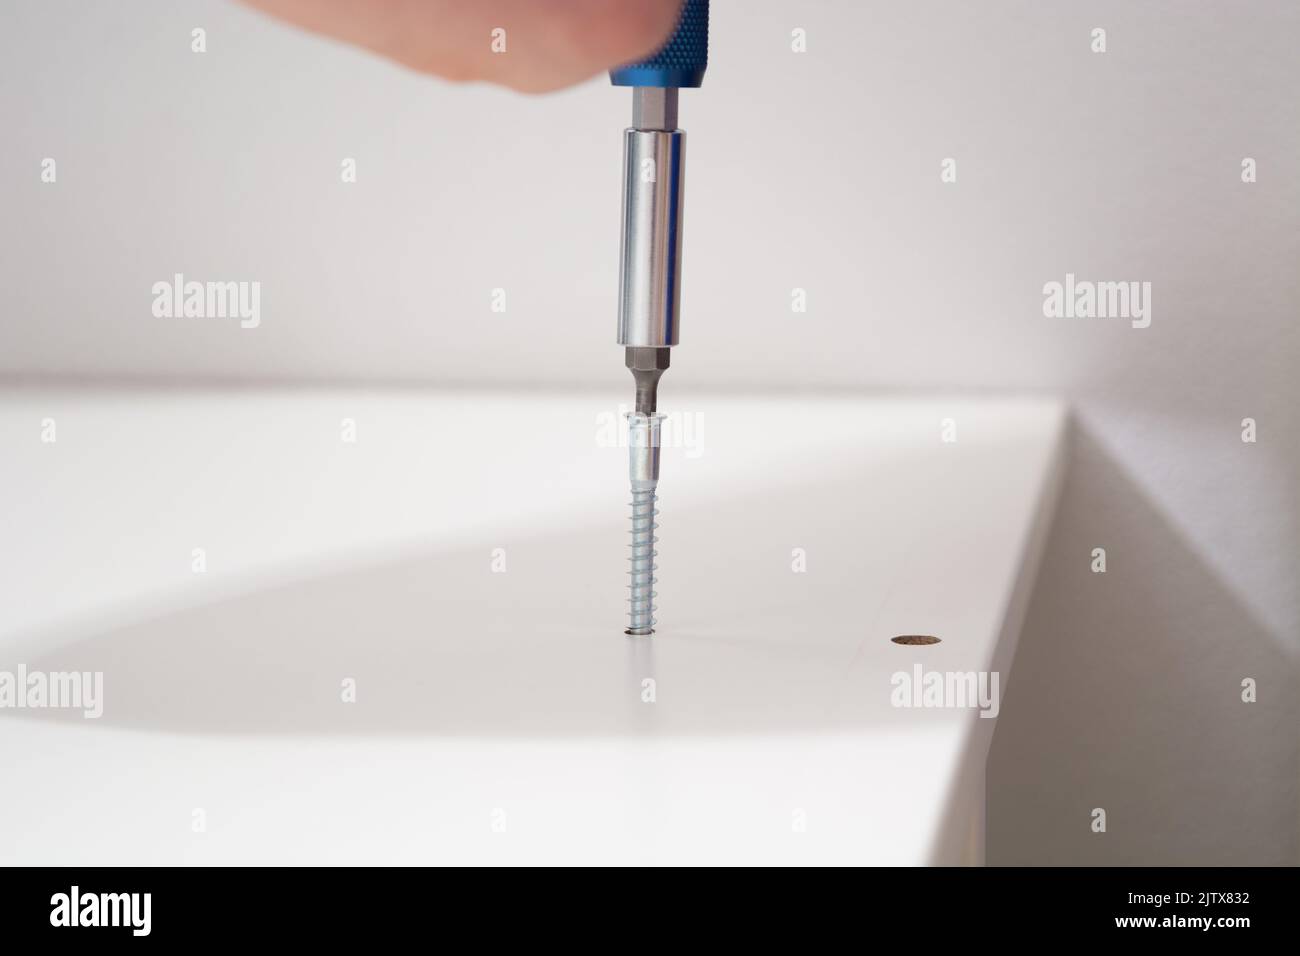 Man hand screwing the screws into furniture. Assembling furniture at home Stock Photo